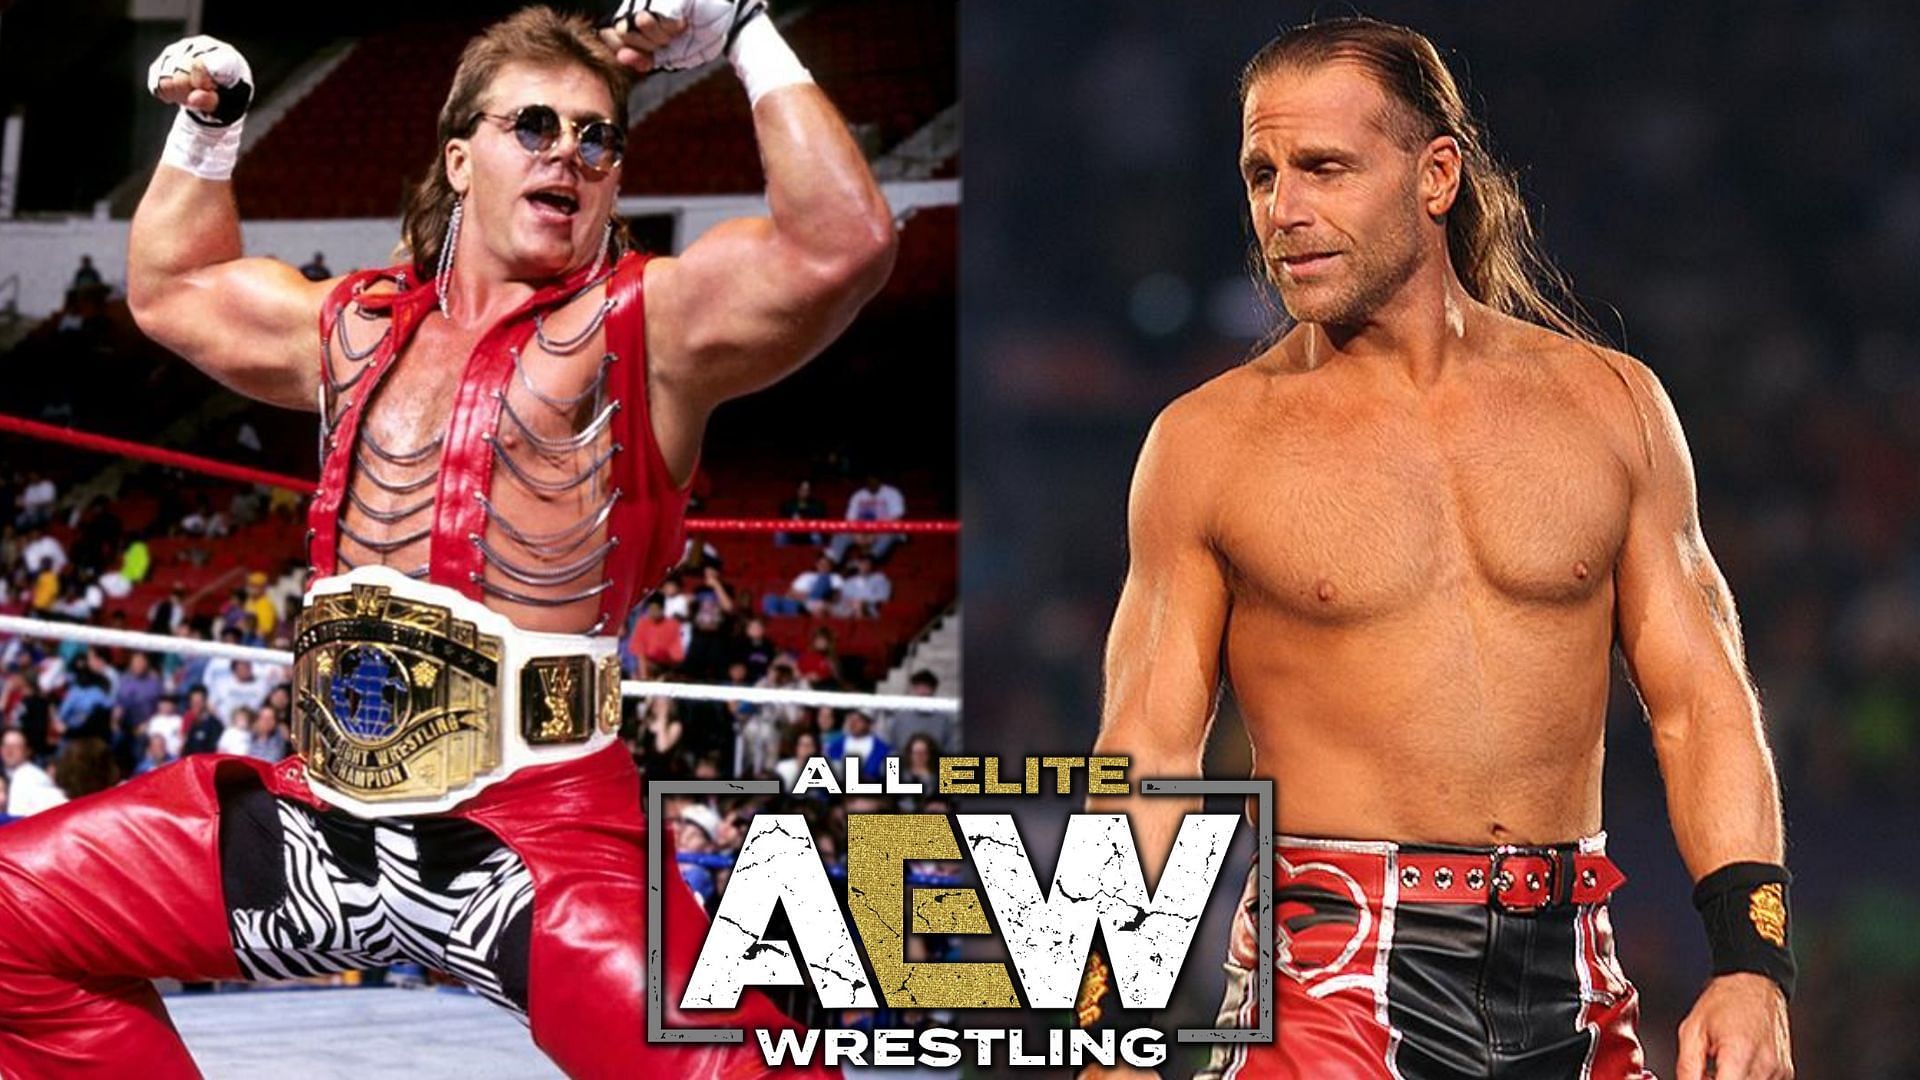 Shawn Michaels is arguably one of the biggest names in pro wrestling.